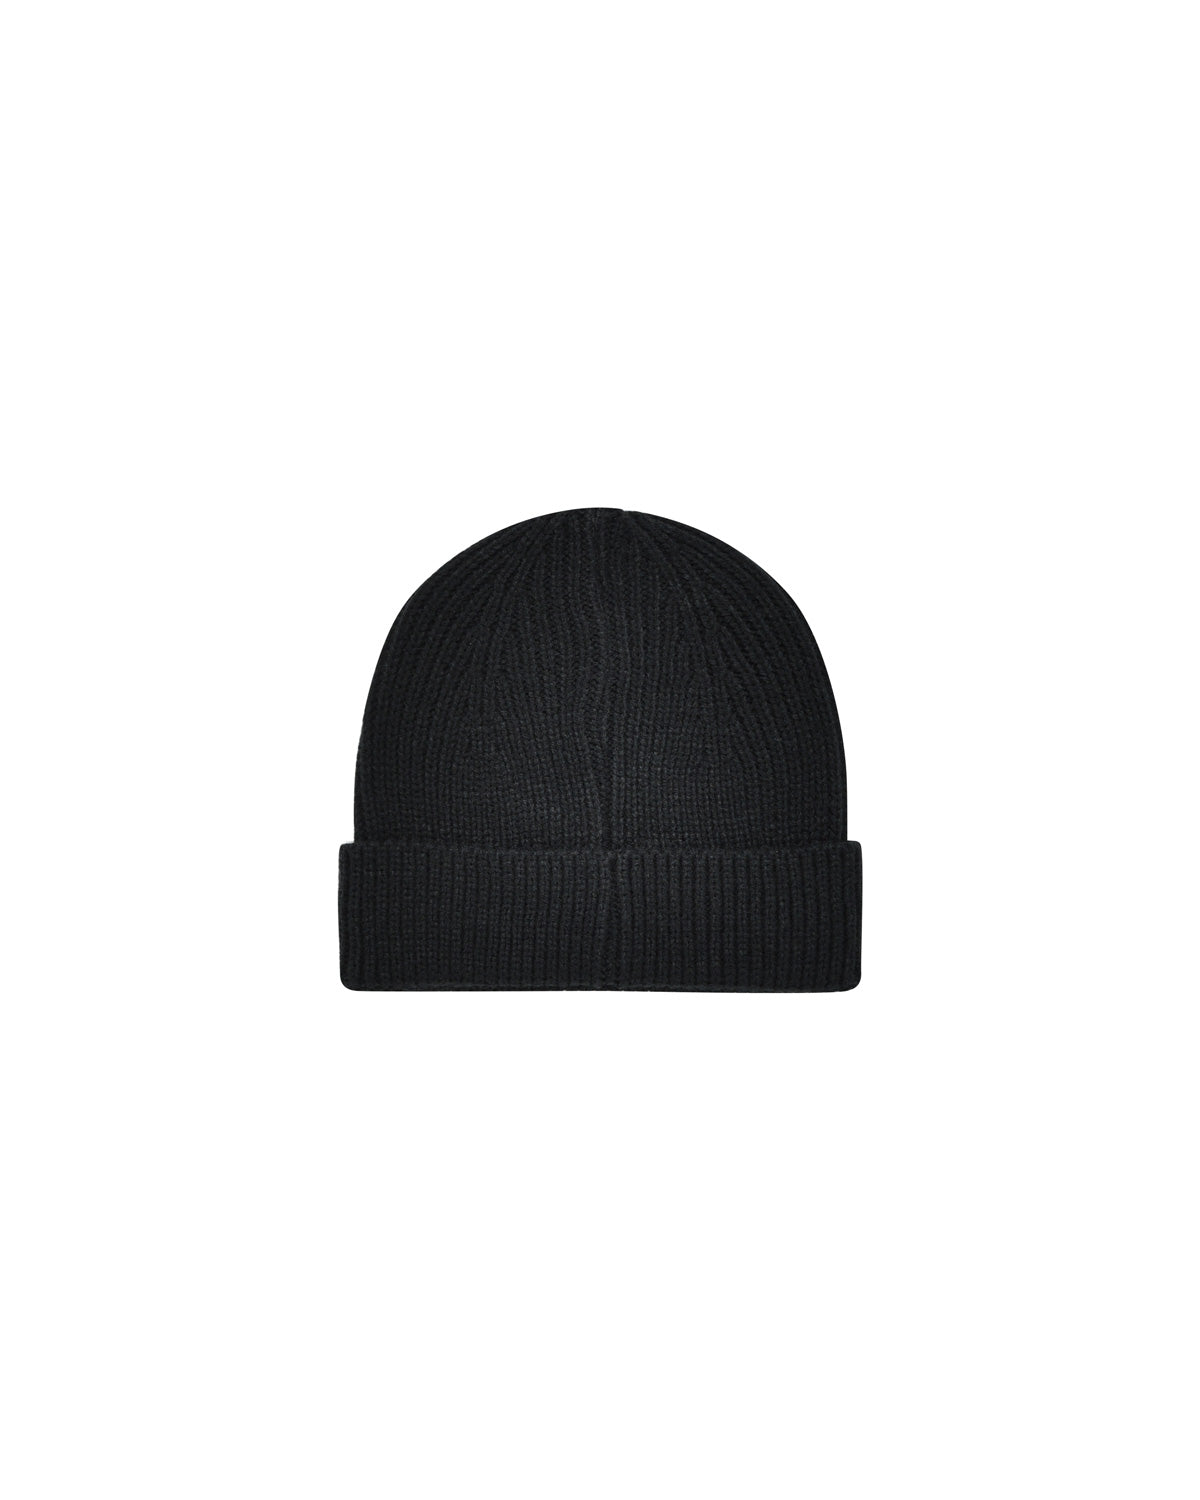 Short hat in black ribbed knit with logo patch